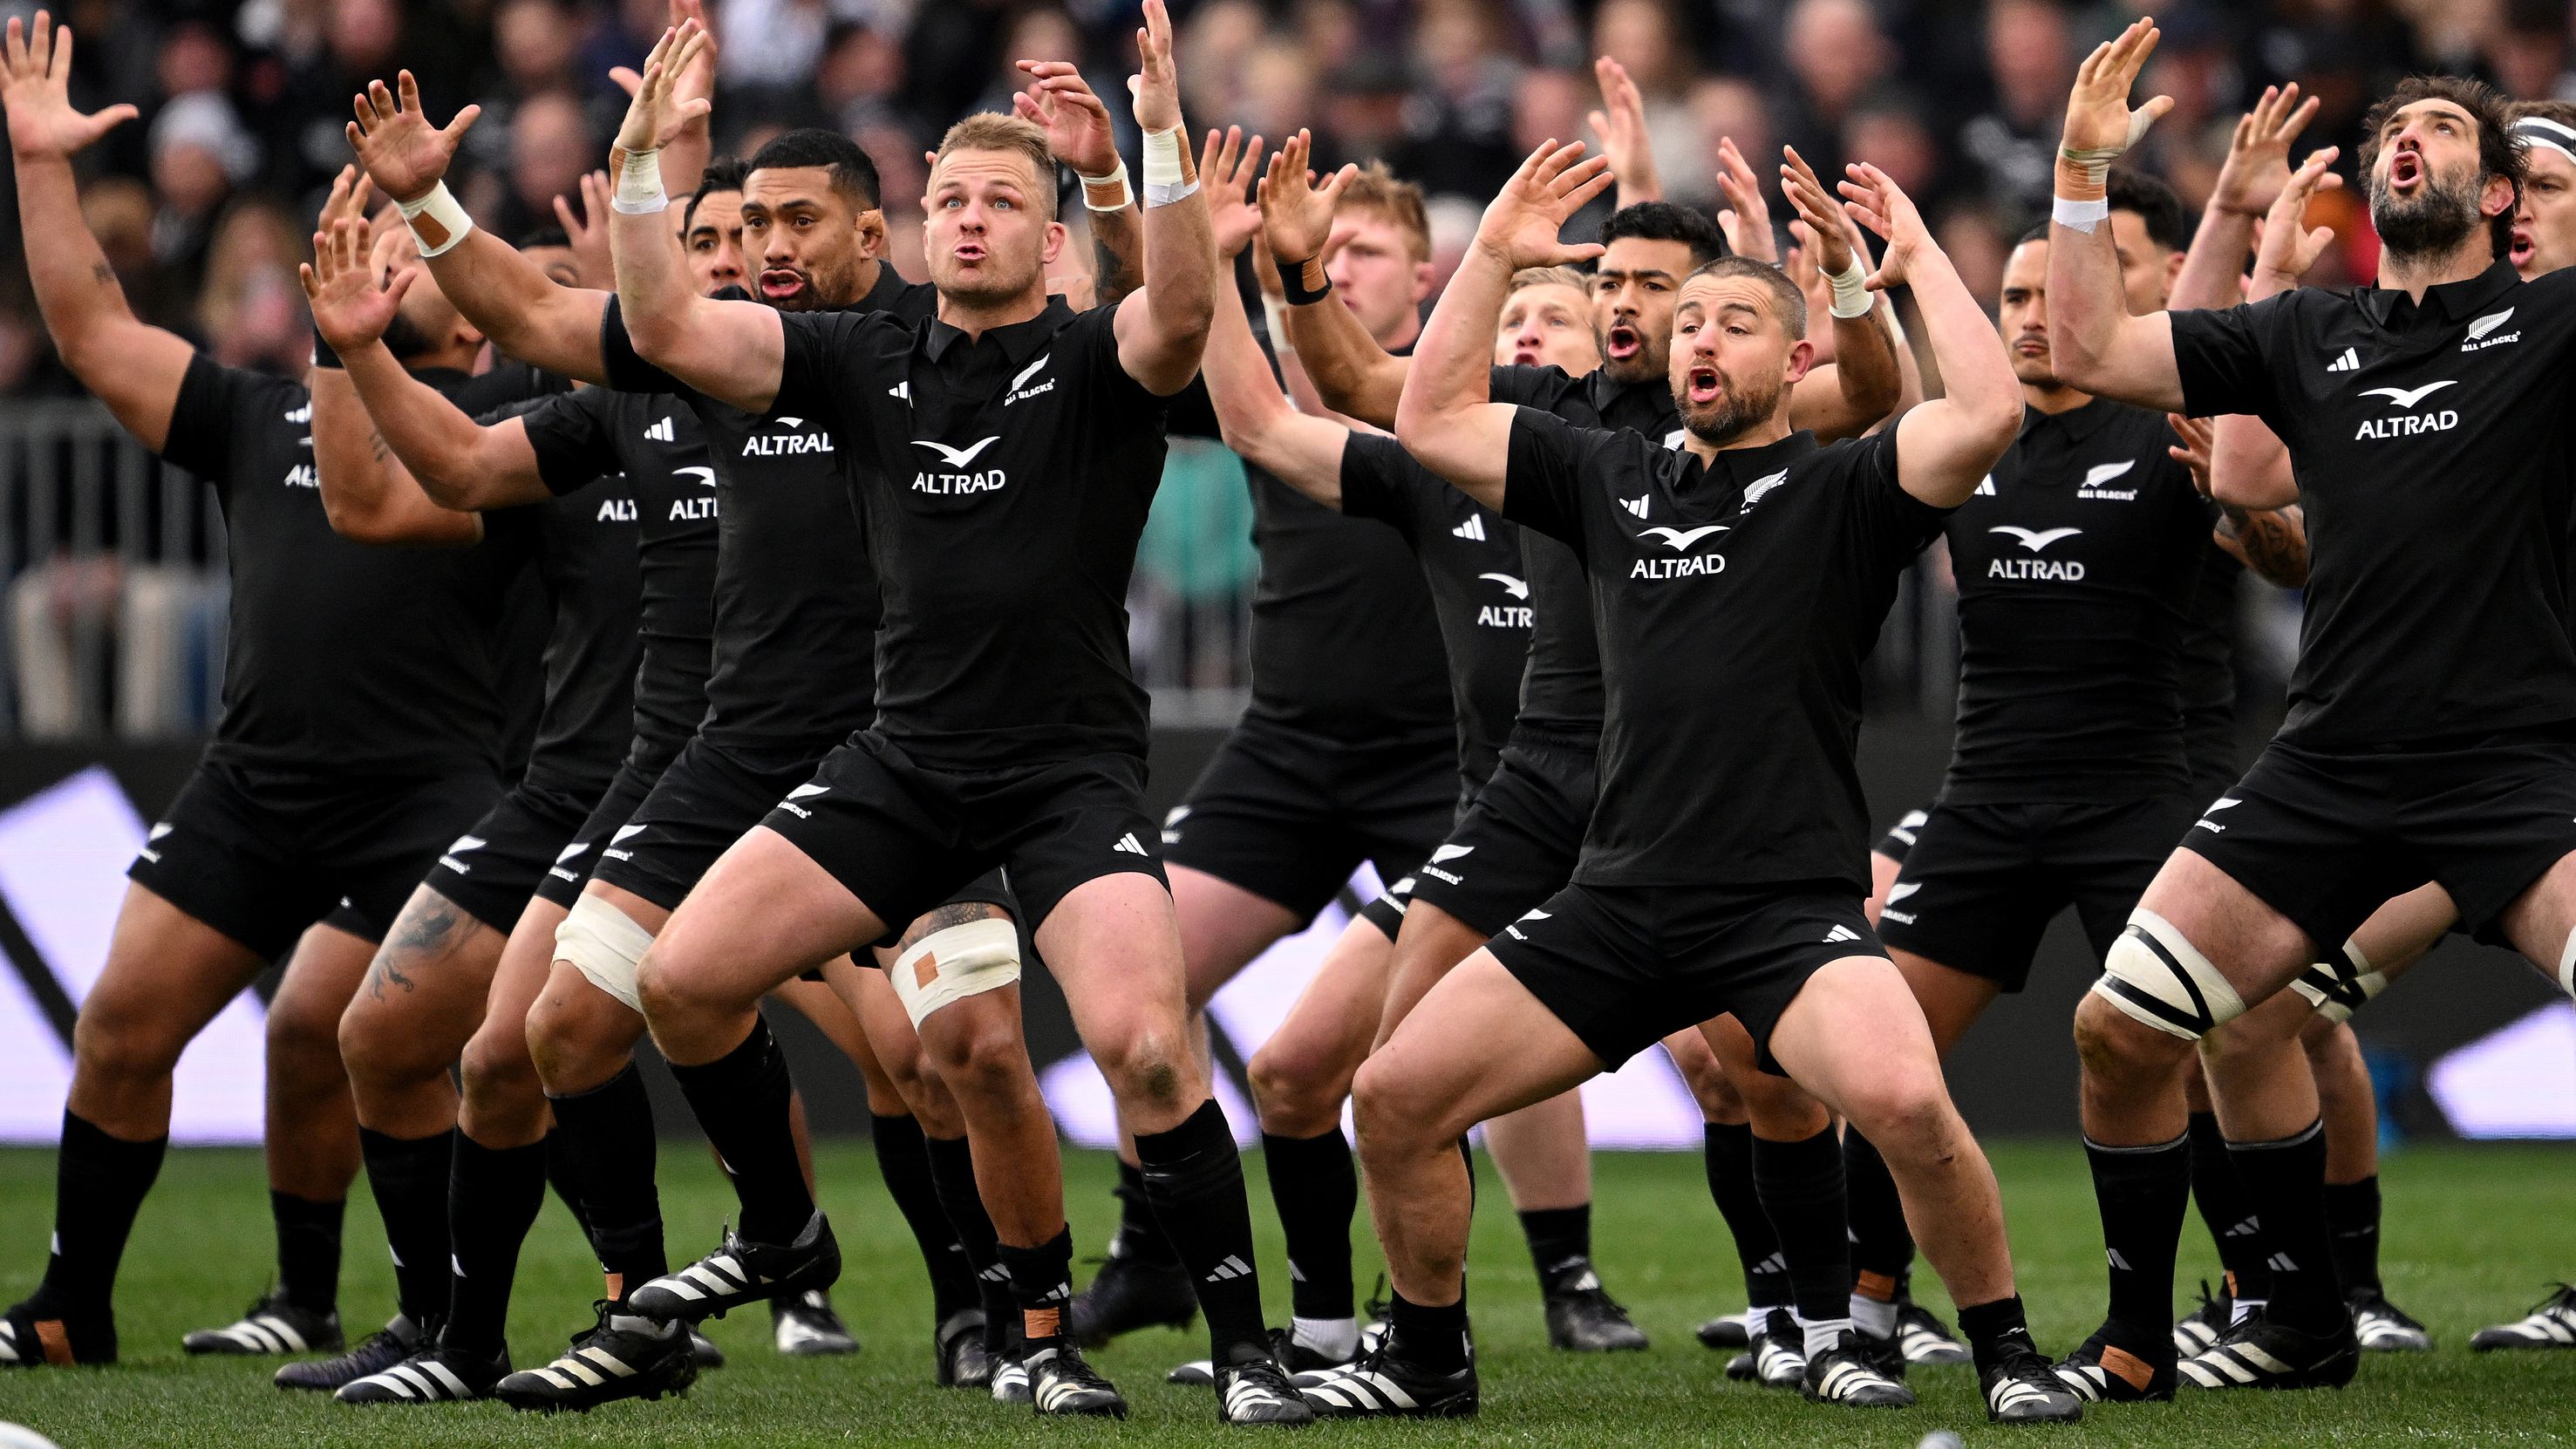 New Zealand perform a haka during The Rugby Championship &amp; Bledisloe Cup match between the All Blacks and Wallabies at Forsyth Barr Stadium.